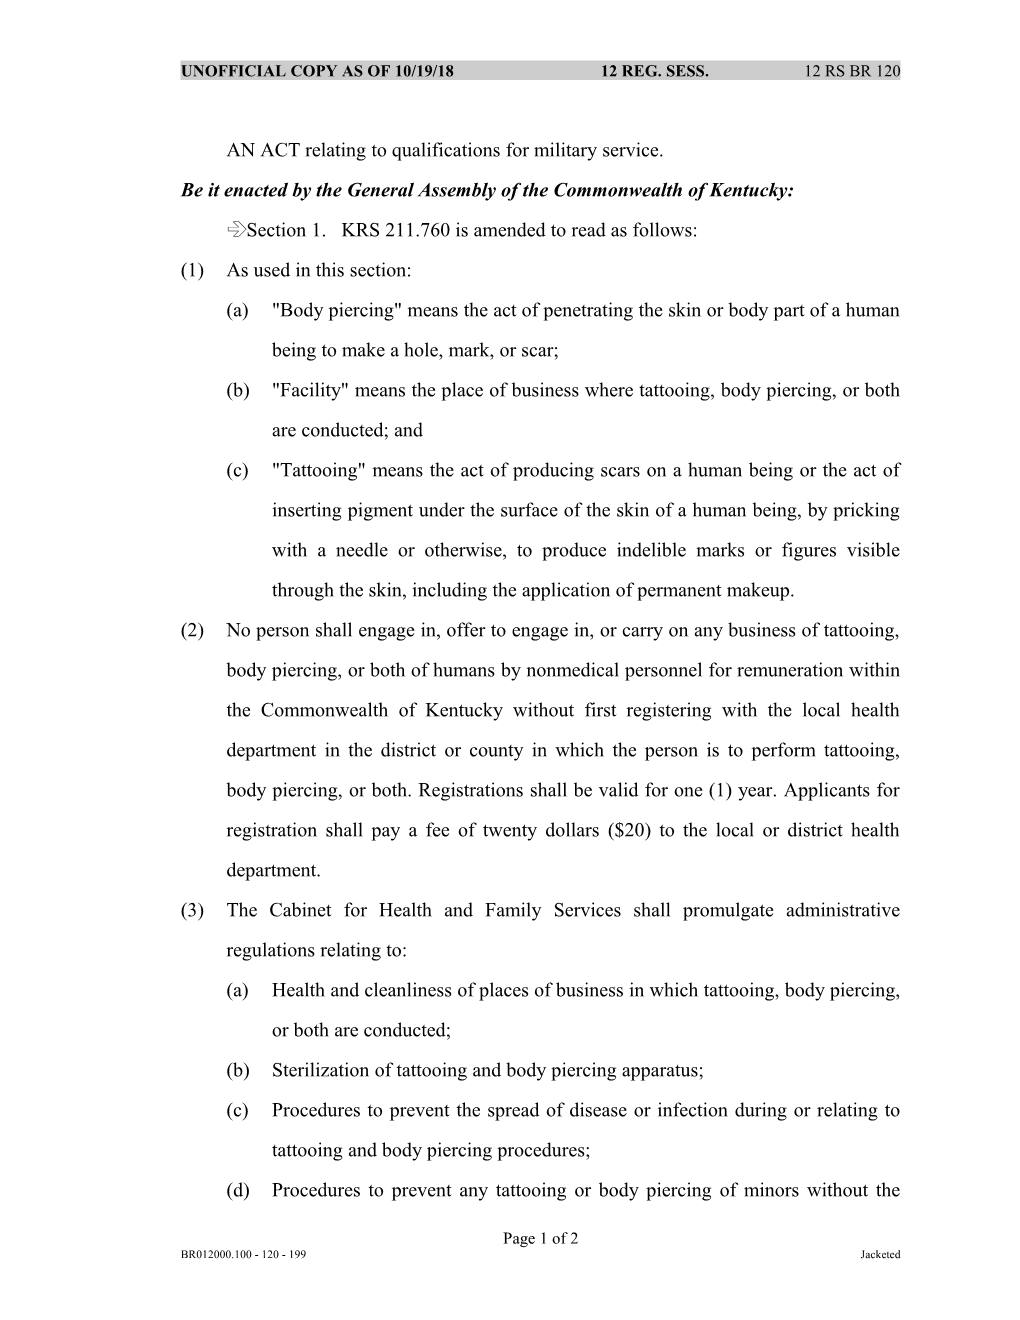 AN ACT Relating to Qualifications for Military Service